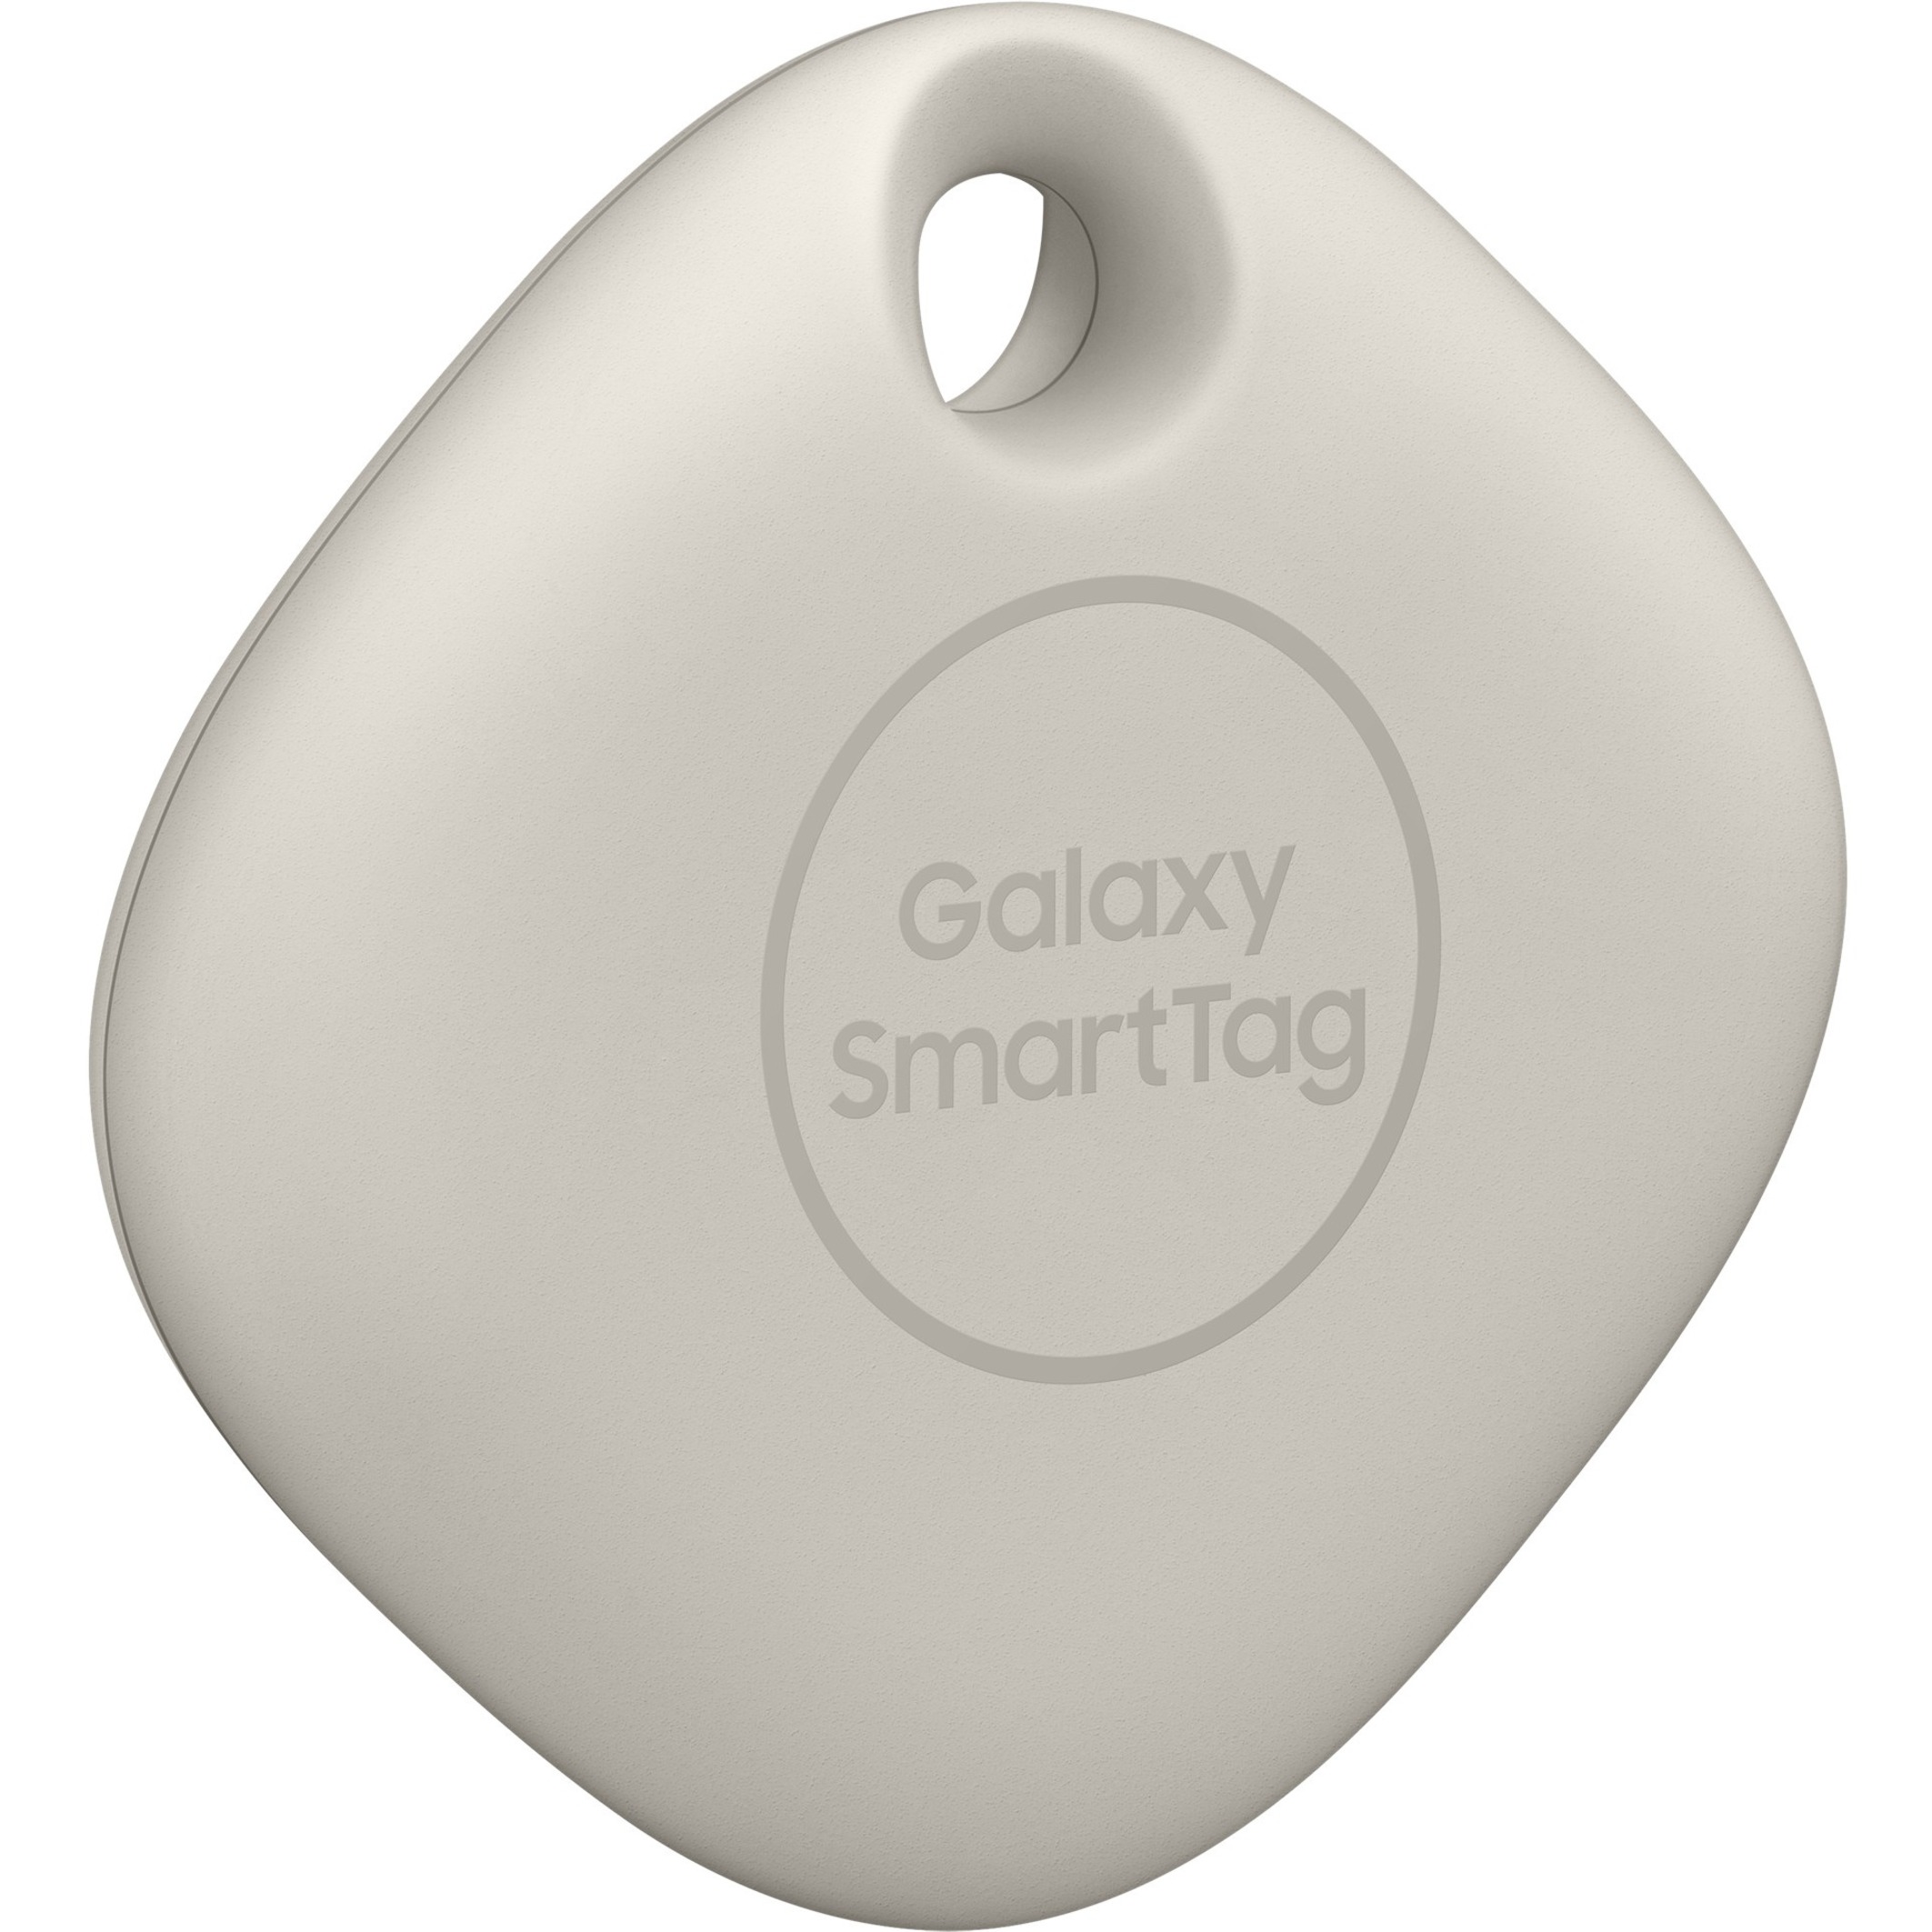 Samsung Galaxy SmartTag, 1-Pack, Oatmeal - image 2 of 8